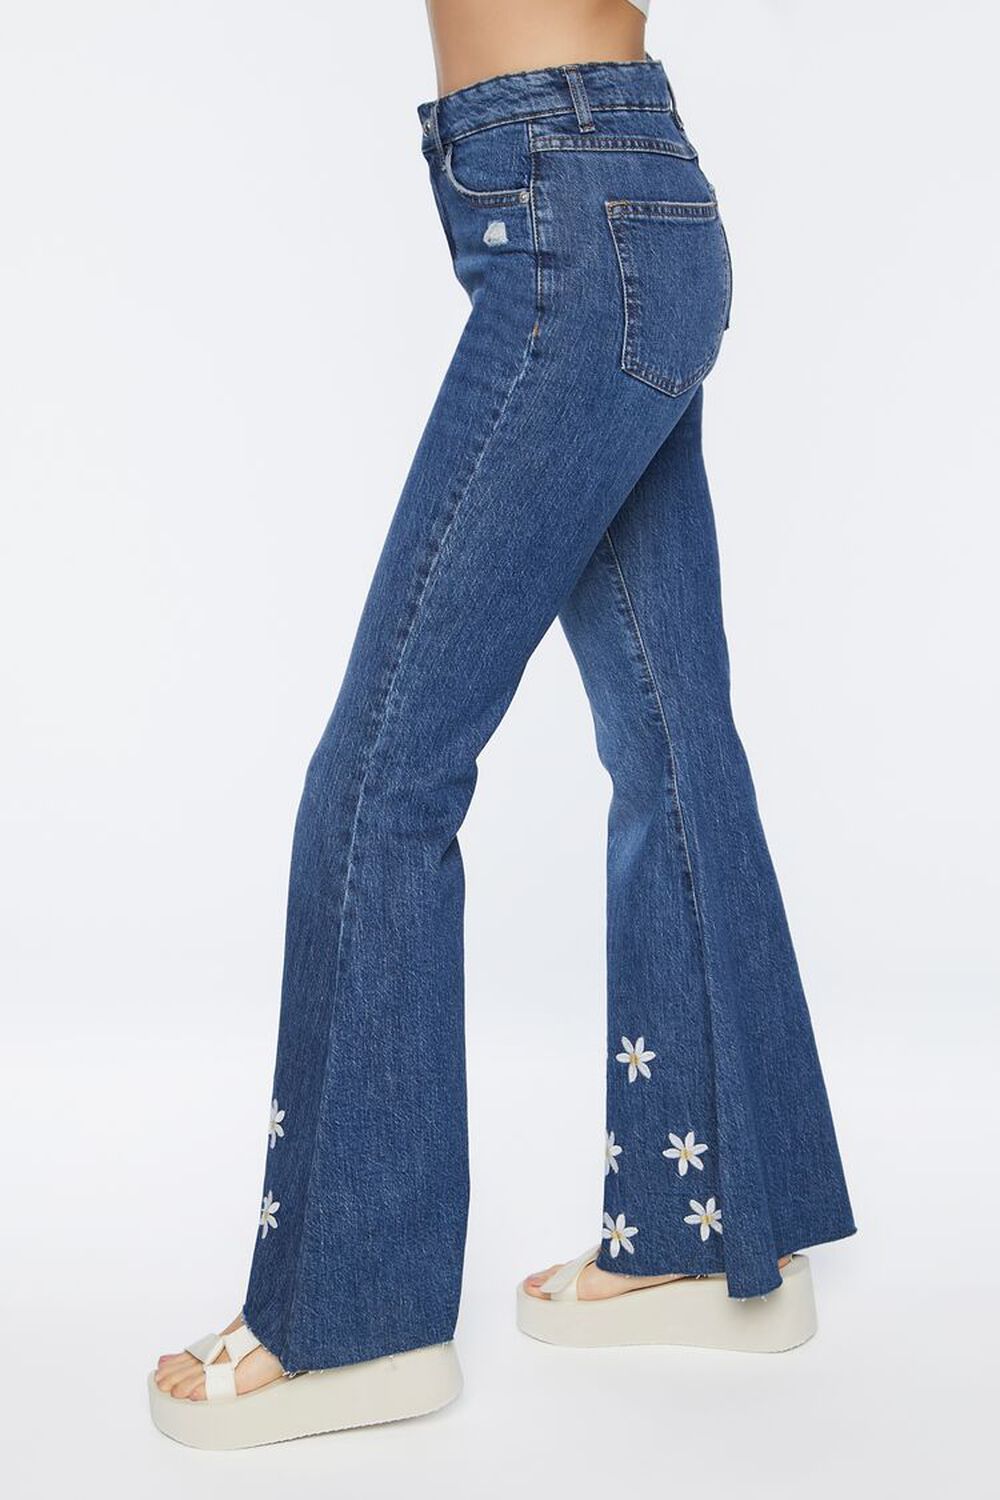 MEDIUM DENIM Recycled Cotton Embroidered Floral Flare Jeans, image 3